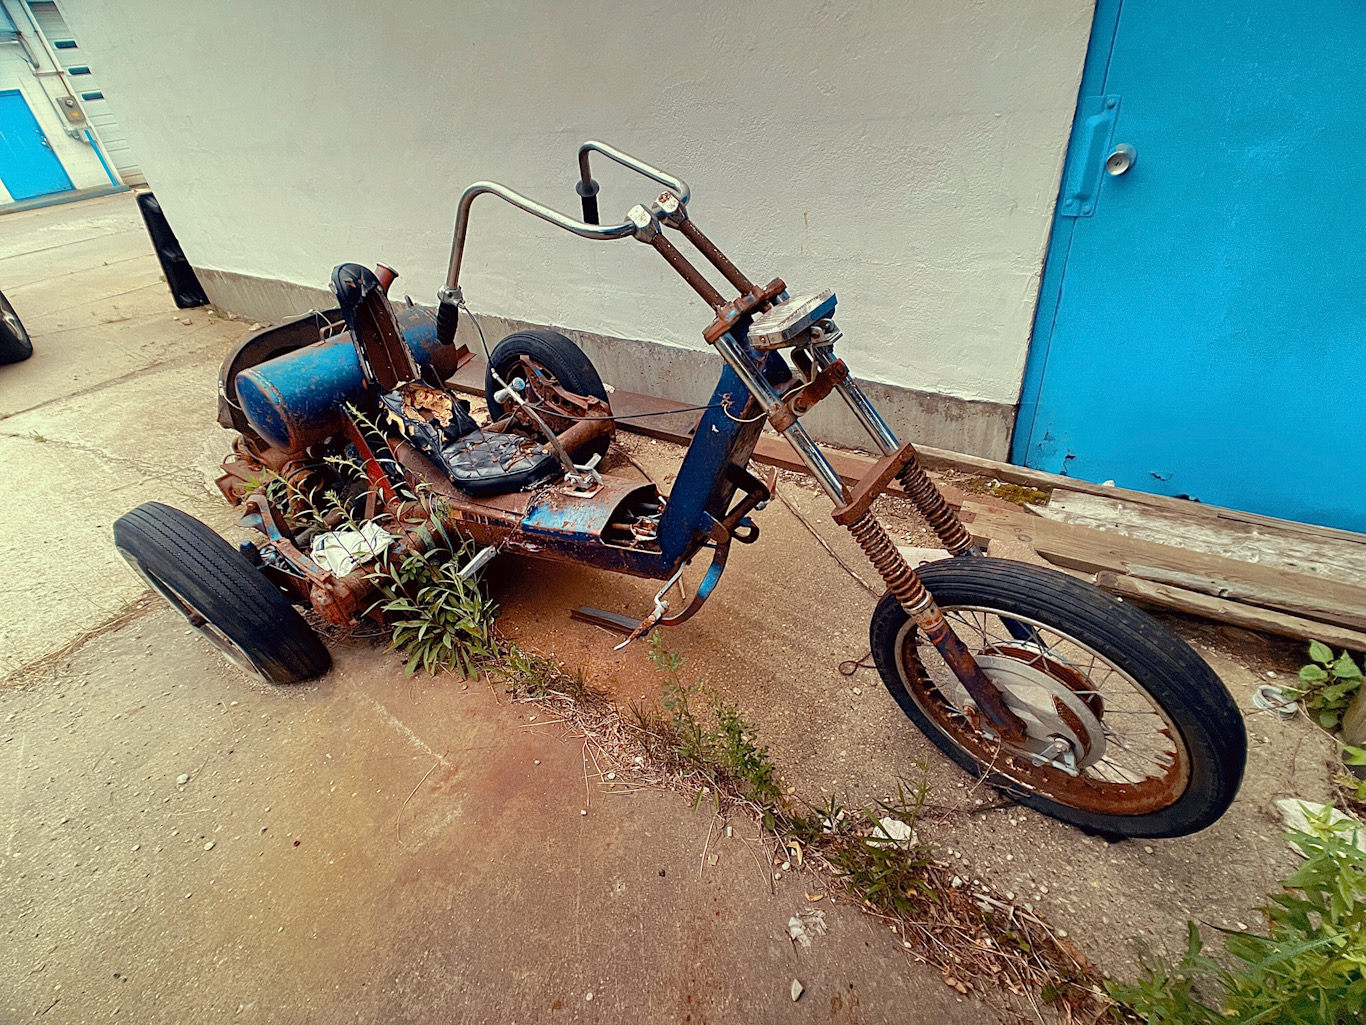 USED TRIKE COMPLETE W/ 40 HP VW TYPE 1 ENGINE & SWING AXLE TRANSMISSION